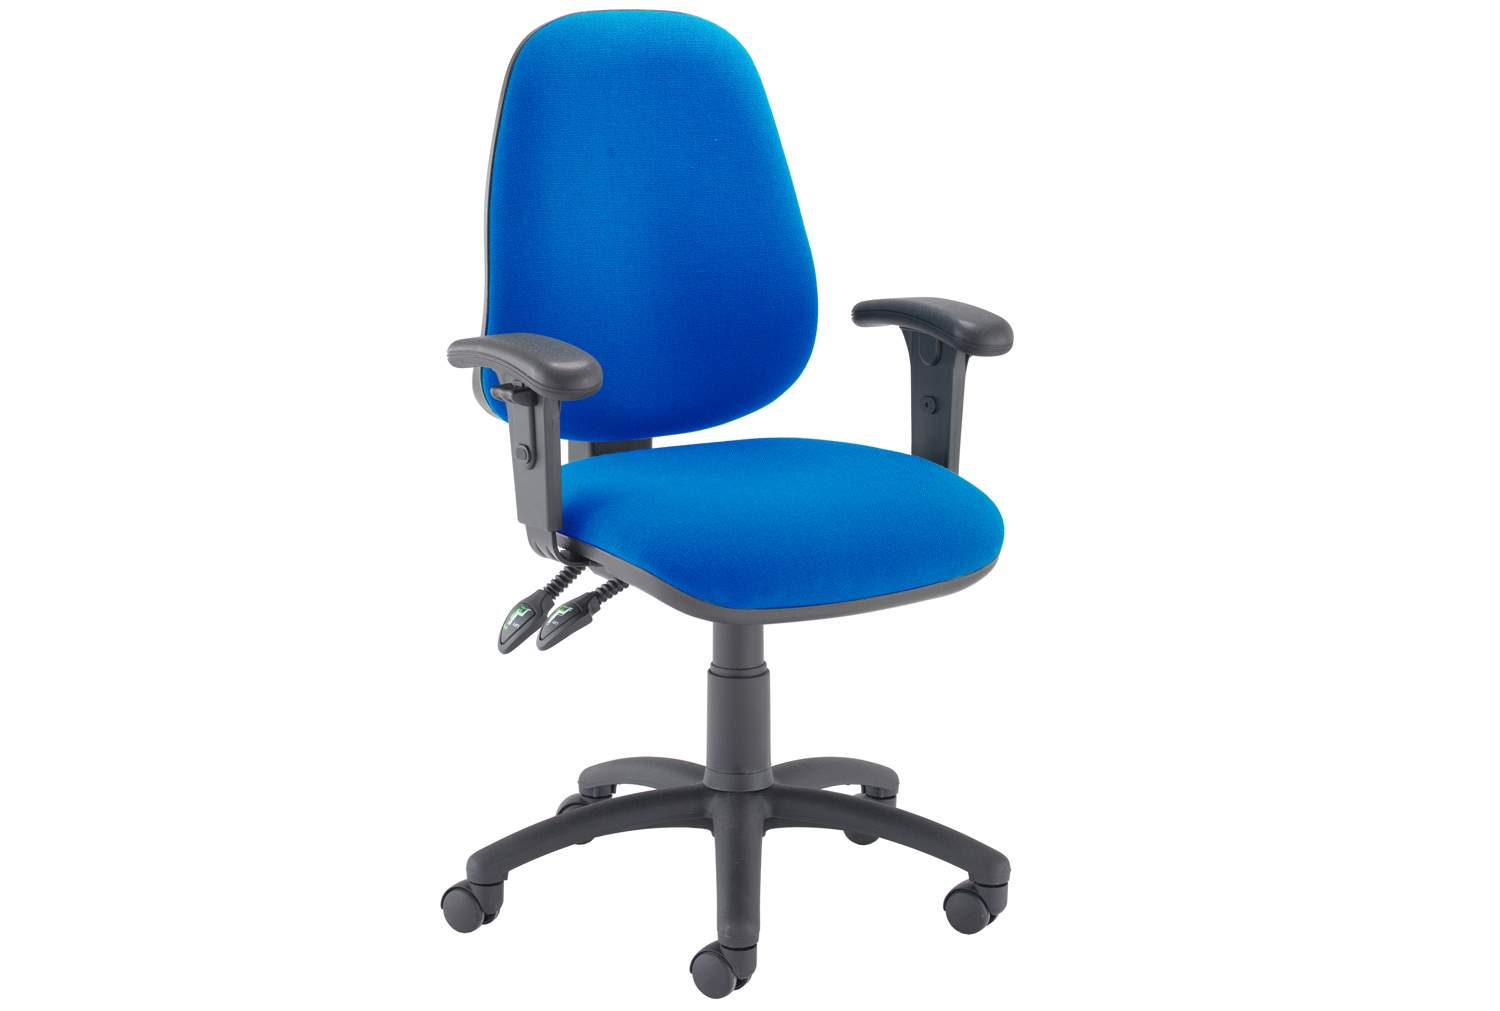 Orchid Deluxe High Back Operator Office Chair, With Adjustable Arms, Blue, Express Delivery